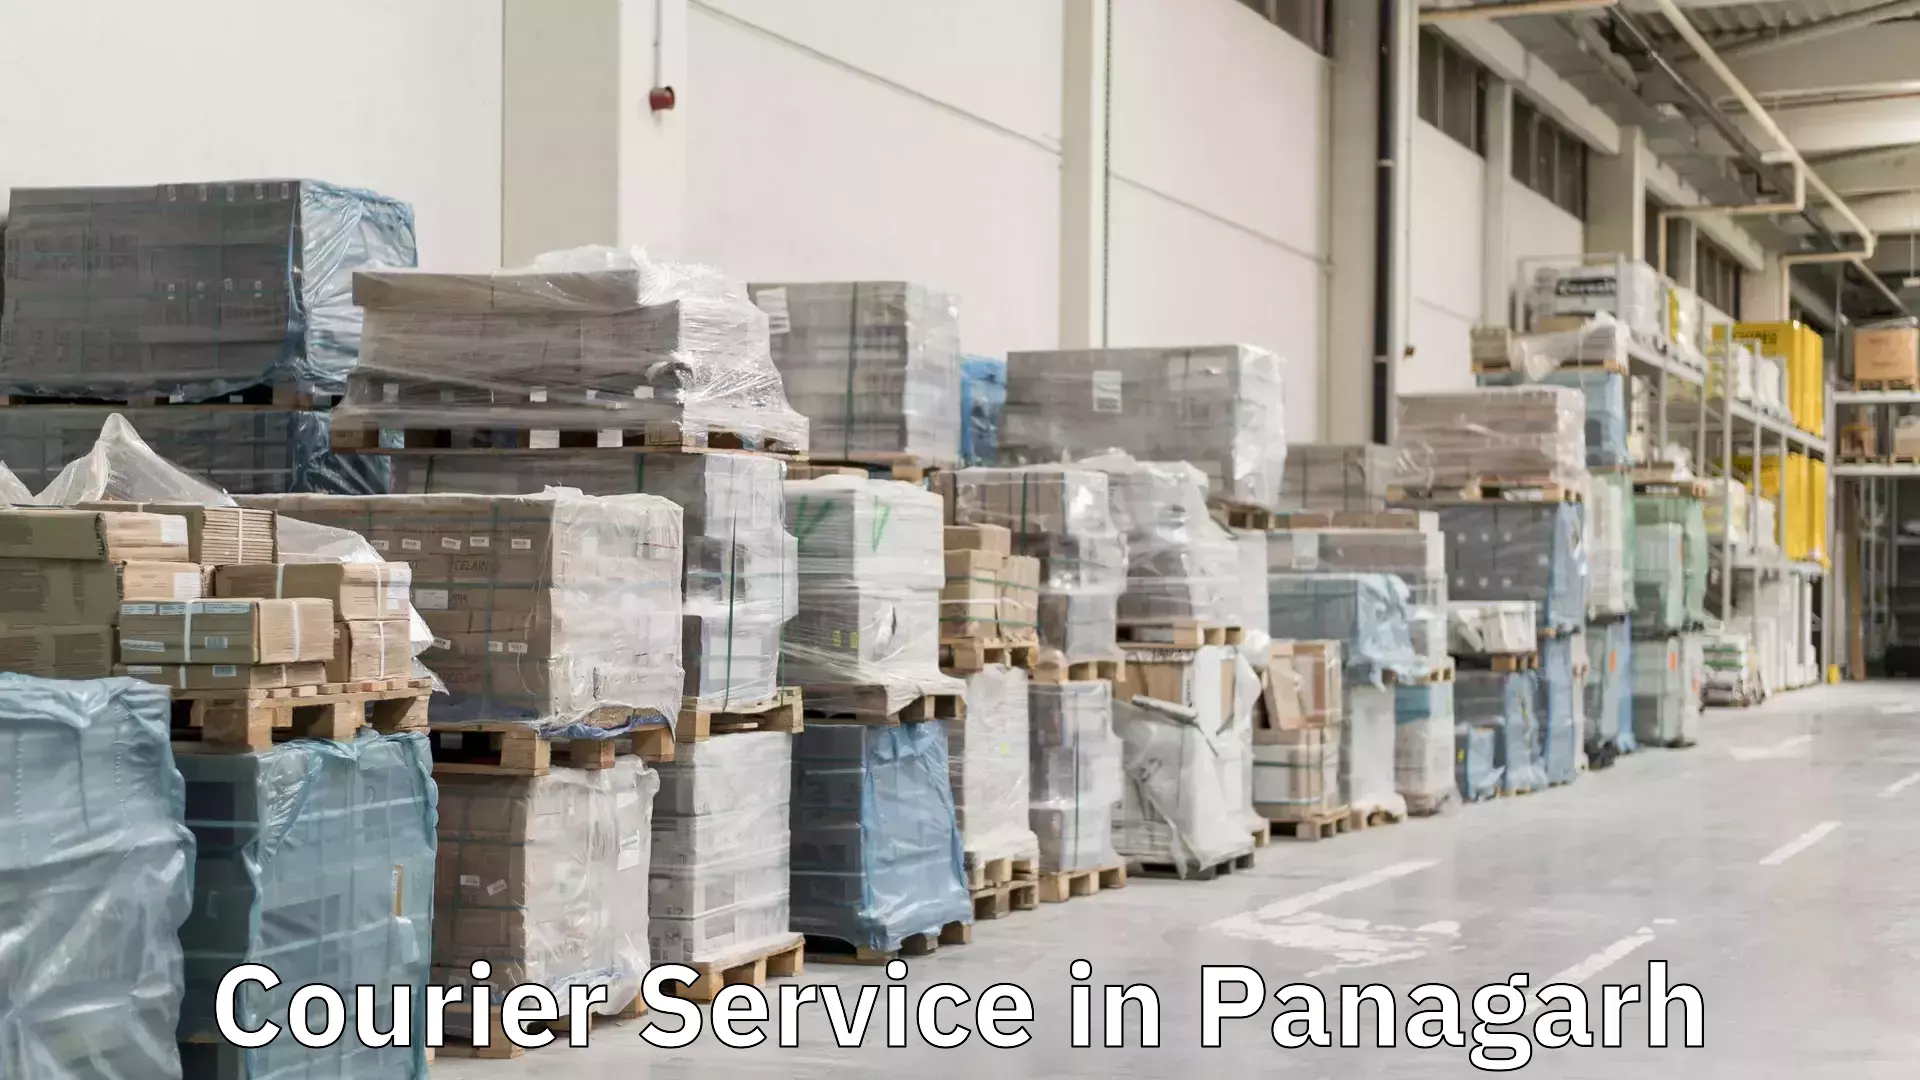 Full-service courier options in Panagarh